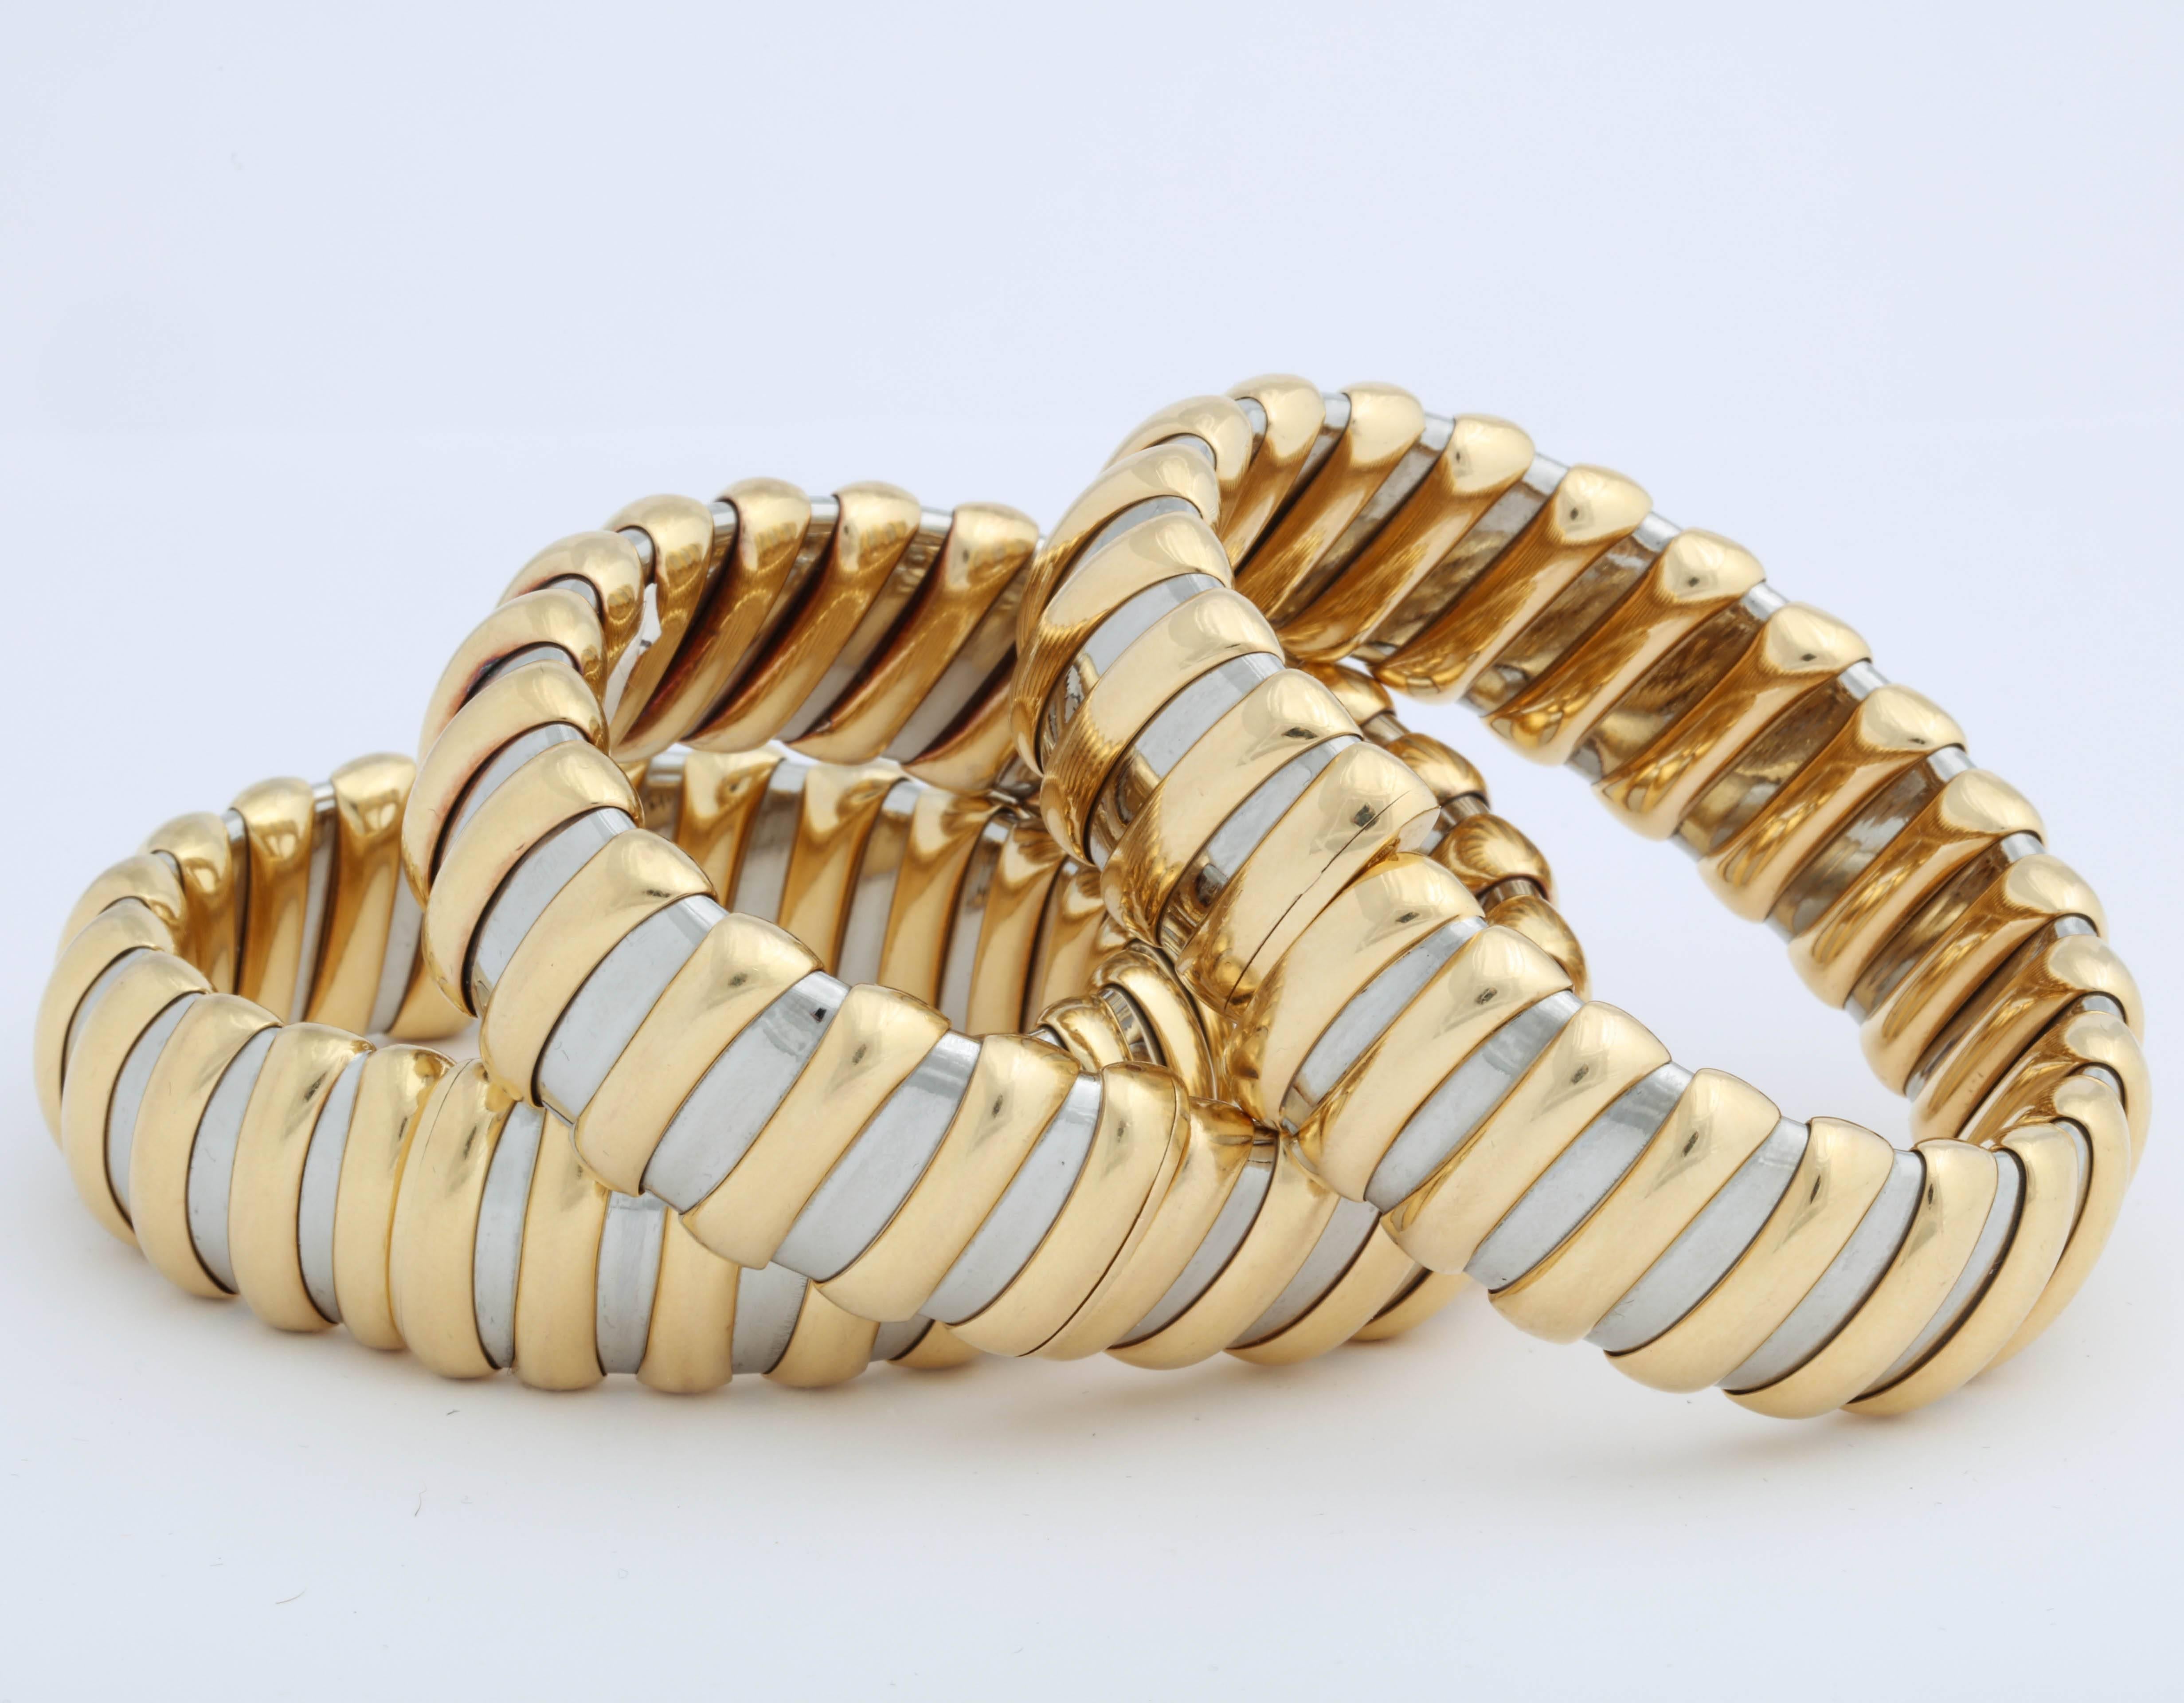 Matching set of 3 Bulgari Steel and Gold Bangles.  Sold as a Set or Singly or as a Pair.  Take your pick!  Very chic look - especially when combined with Bulgari Steel & Gold Collar which we list  on 1stdibs, as well.  Each marked in lozenge